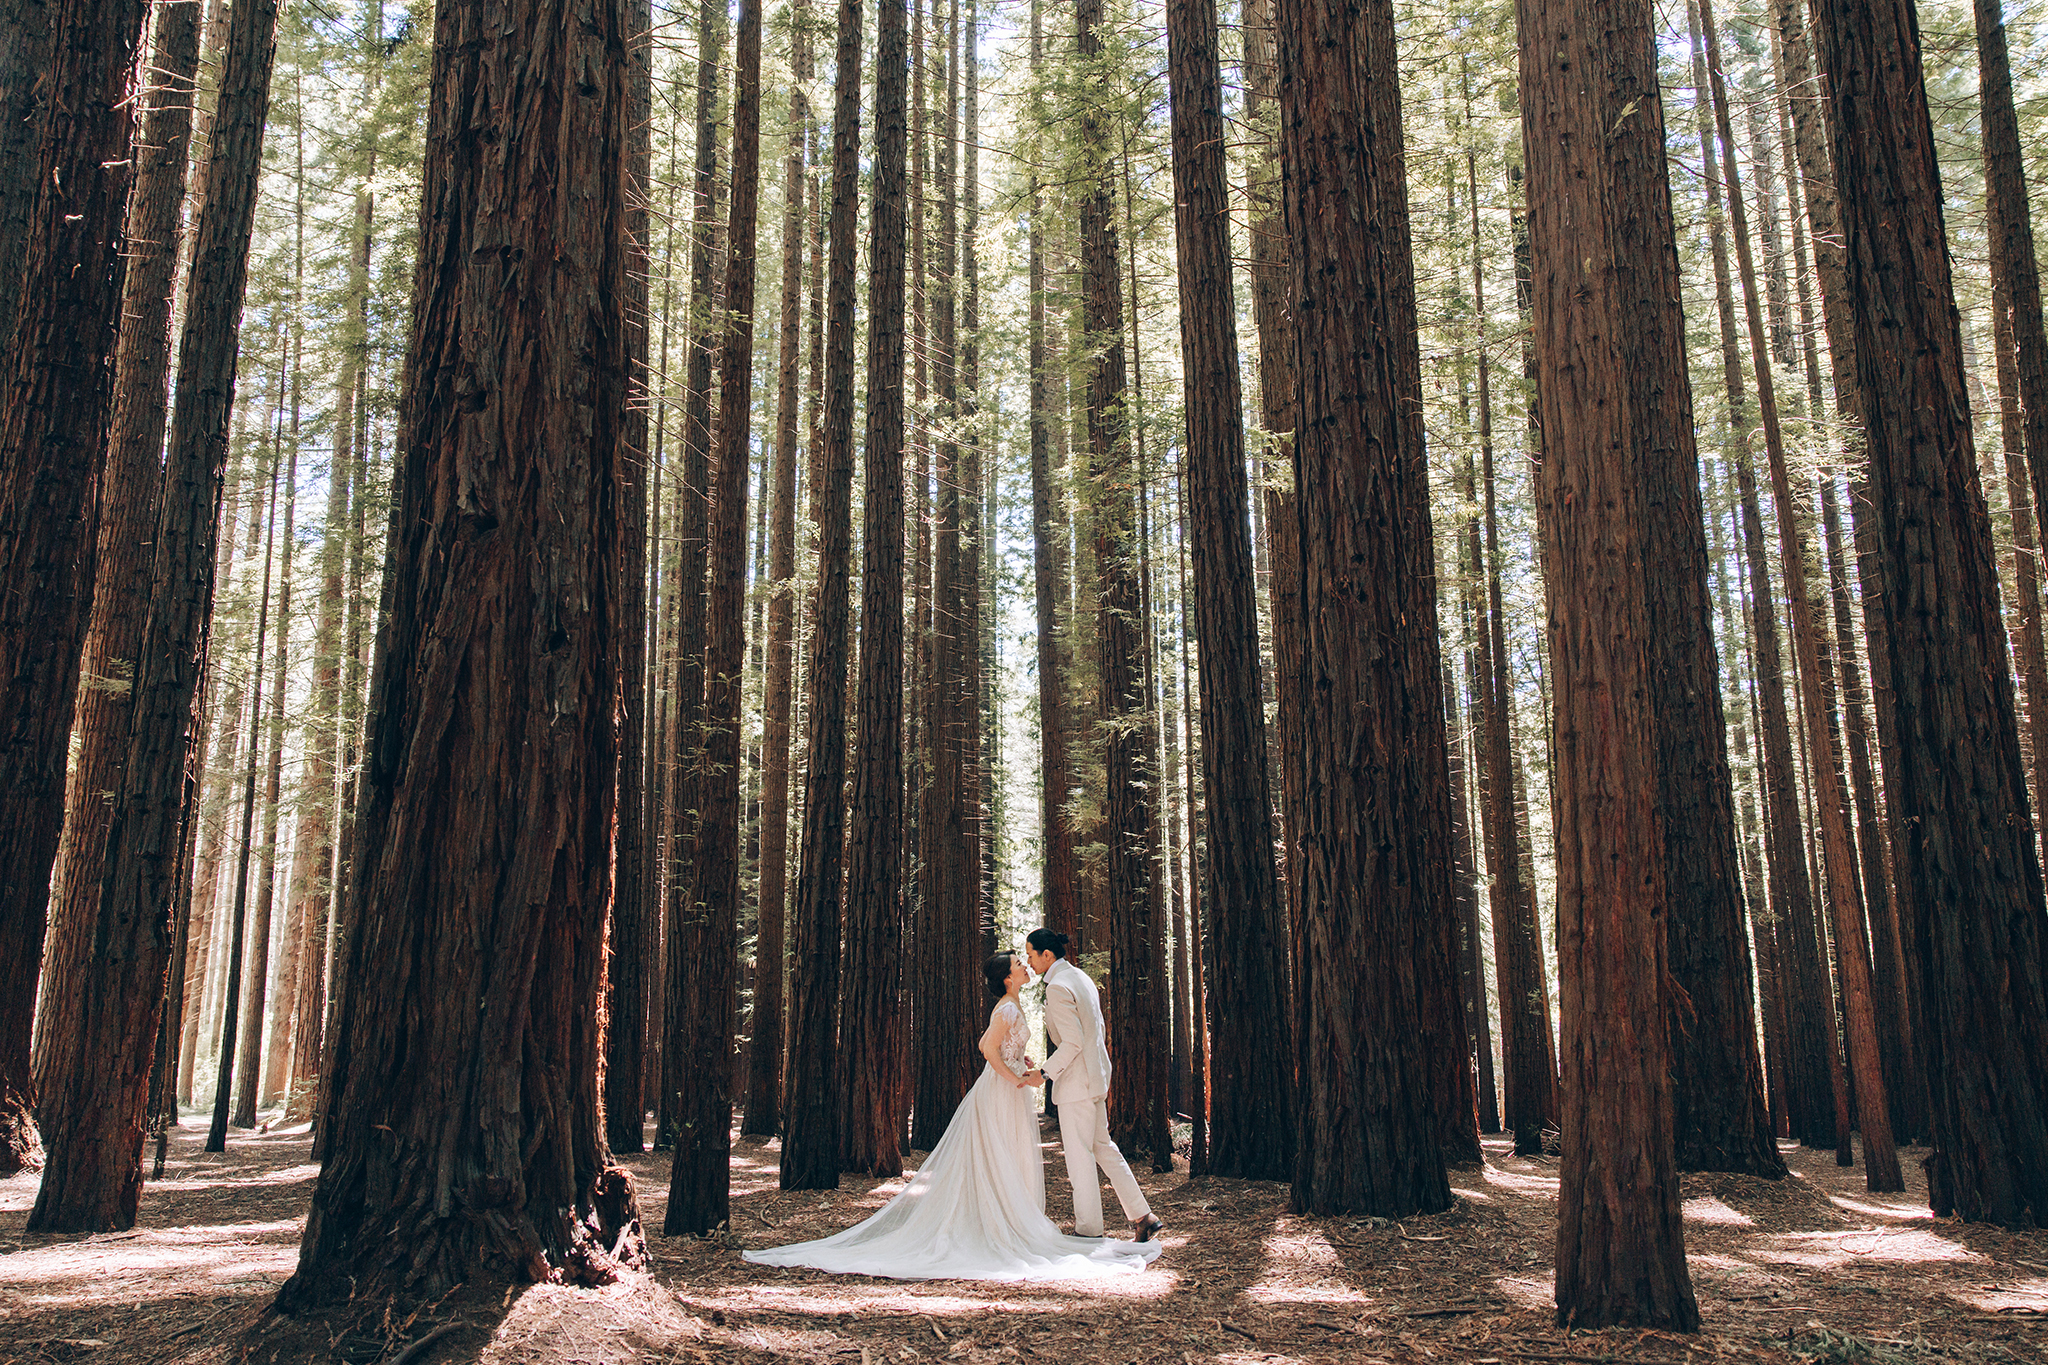 Melbourne Pre-Wedding Photoshoot in Redwood Forest by Freddy on OneThreeOneFour 0